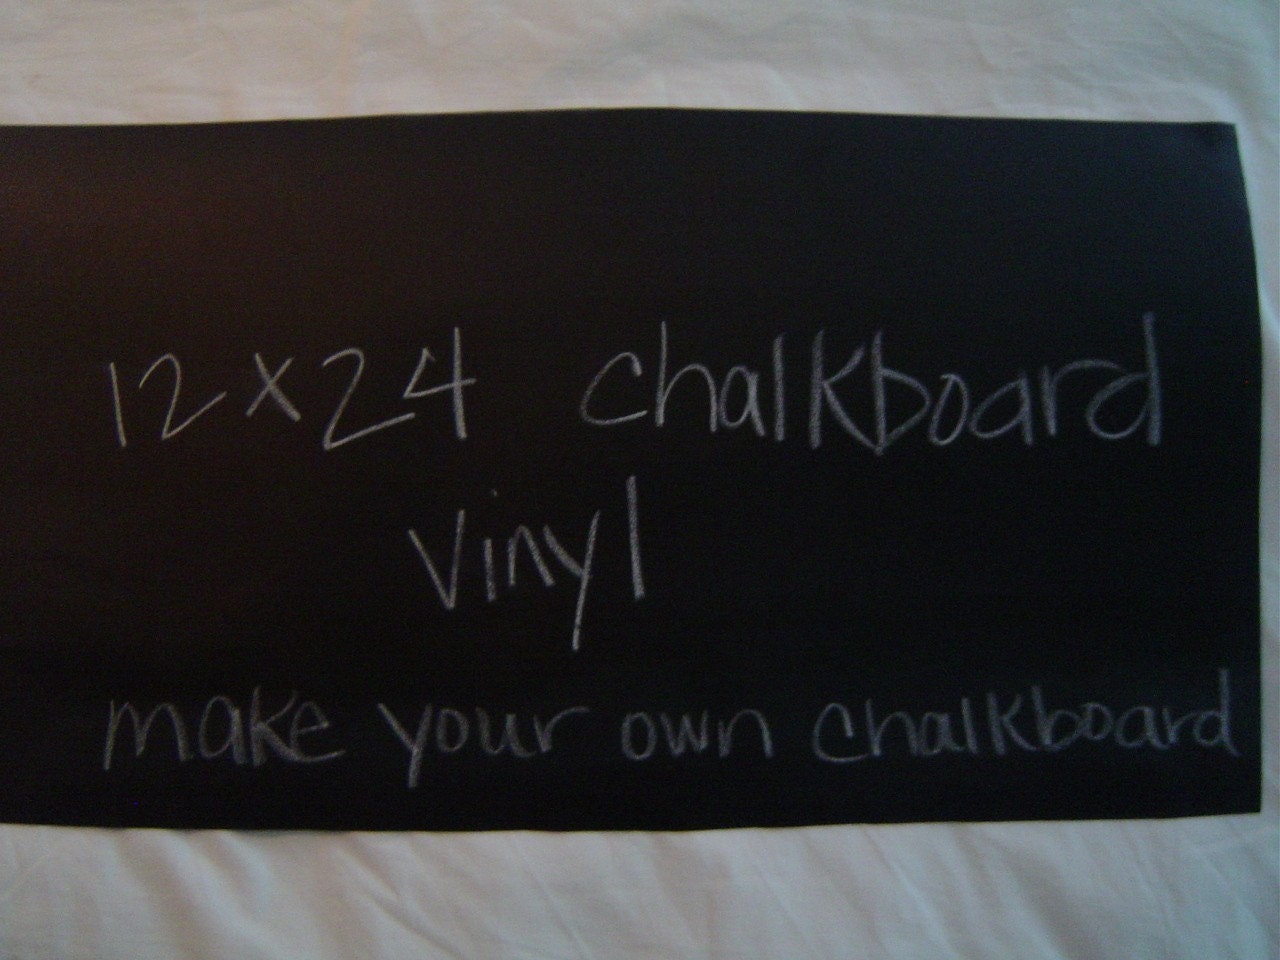 Chalkboard Vinyl Sticker 12 x 24 inches Cut with CRICUT or scissors to make your own chalkboard labels- 2 sheets